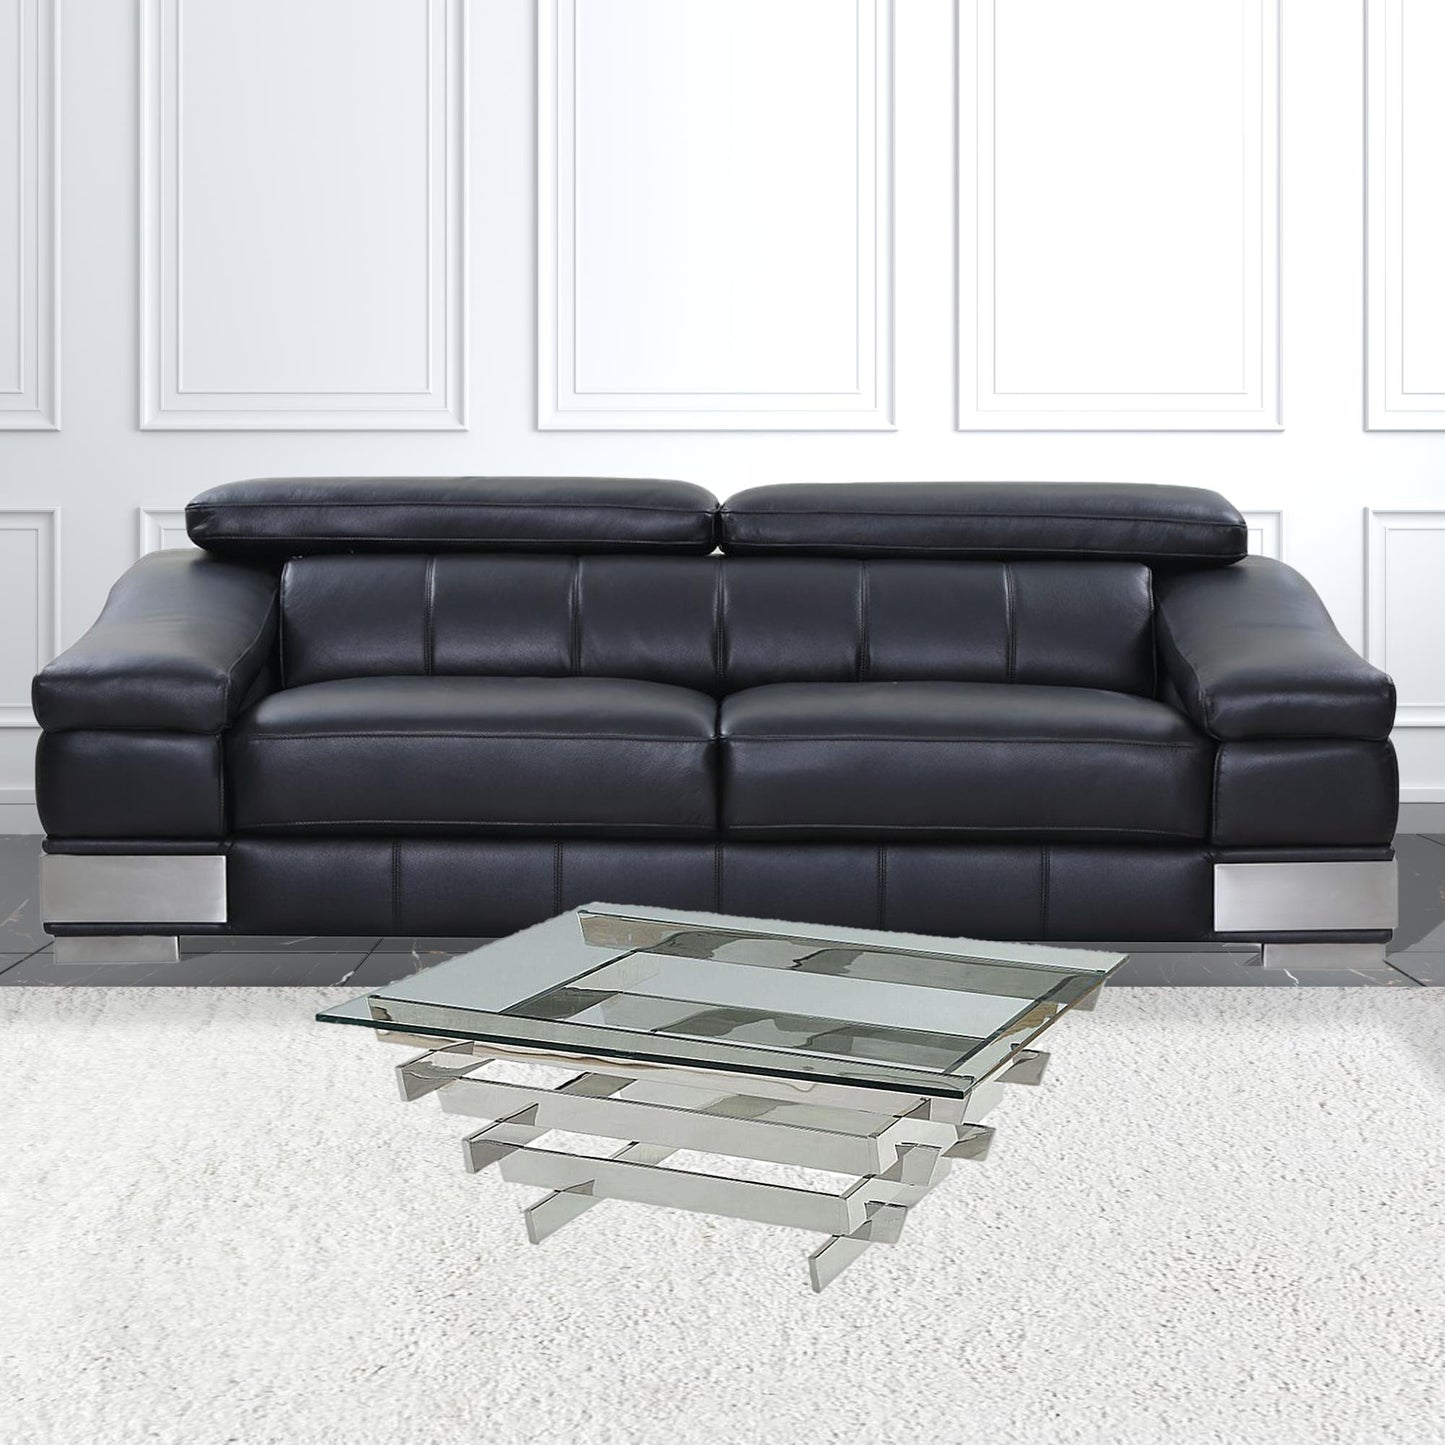 41" Chrome And Clear Glass Square Coffee Table By Homeroots